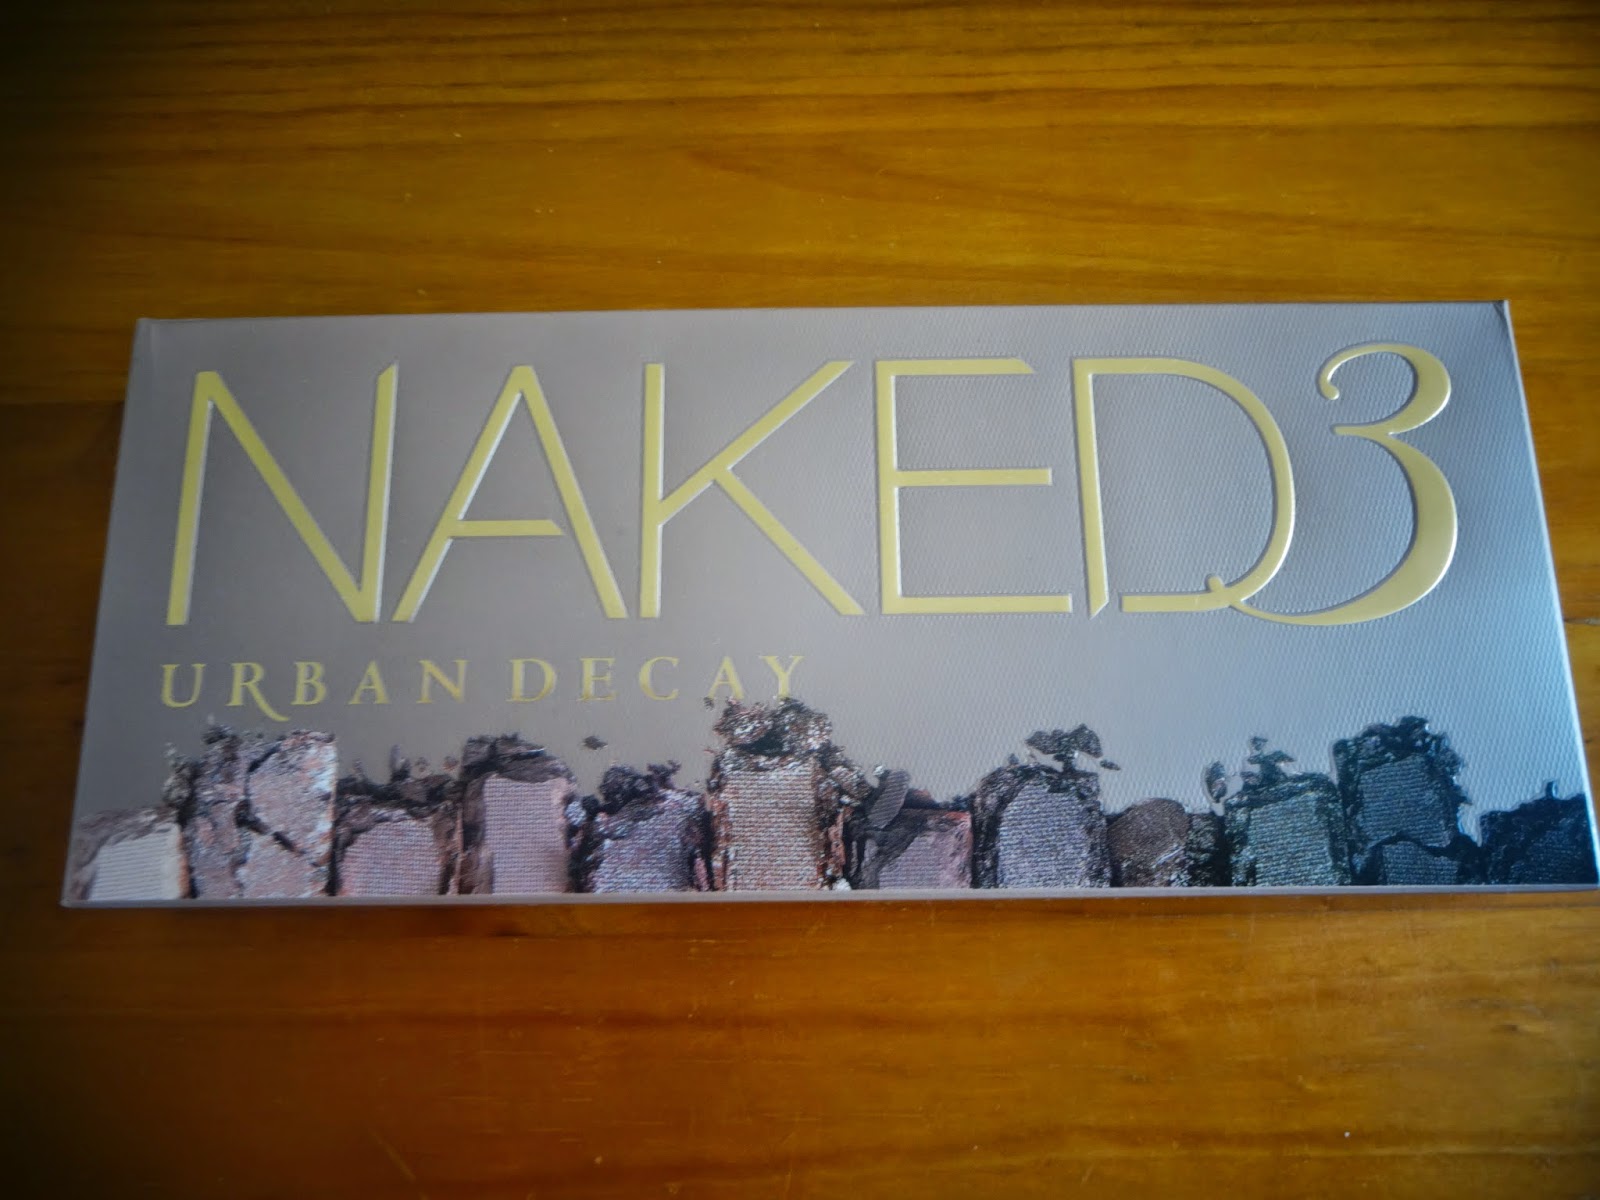 Blogiversary + International Giveaway: Urban Decay Naked 3 Palette (Closed) 1